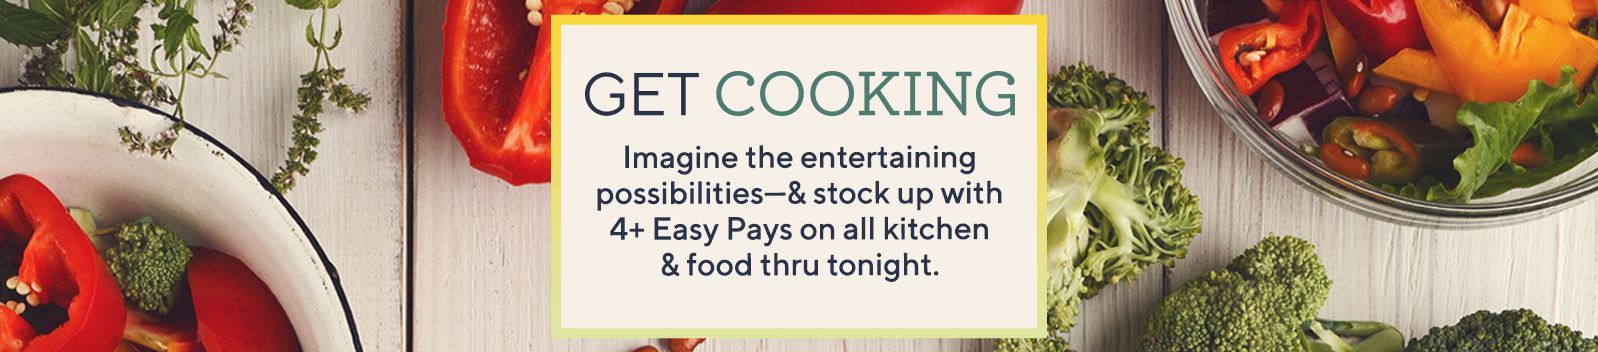 Get Cooking. Imagine the entertaining possibilities—& stock up with 4 or more Easy Pays on all kitchen & food thru tonight. 